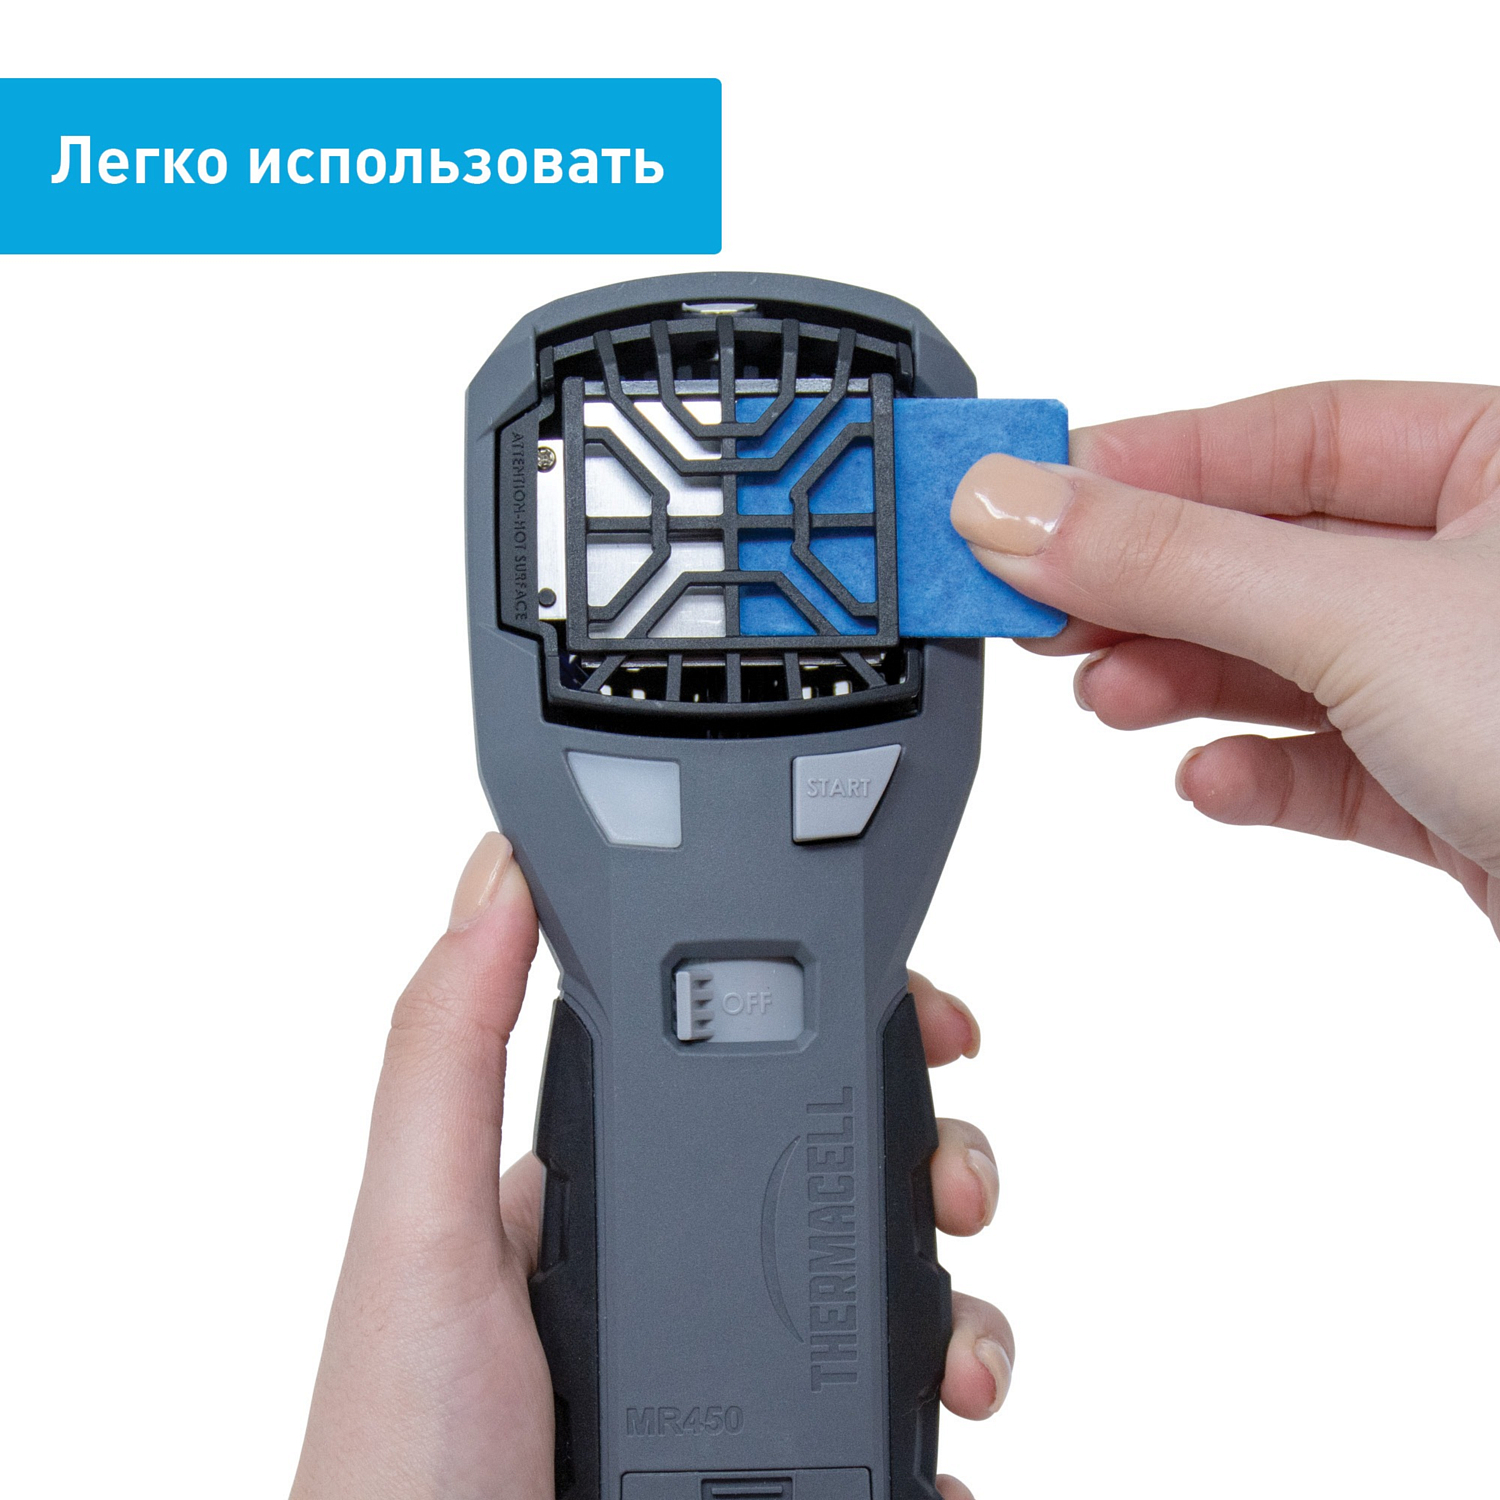 Фумигатор ThermaCell Repeller